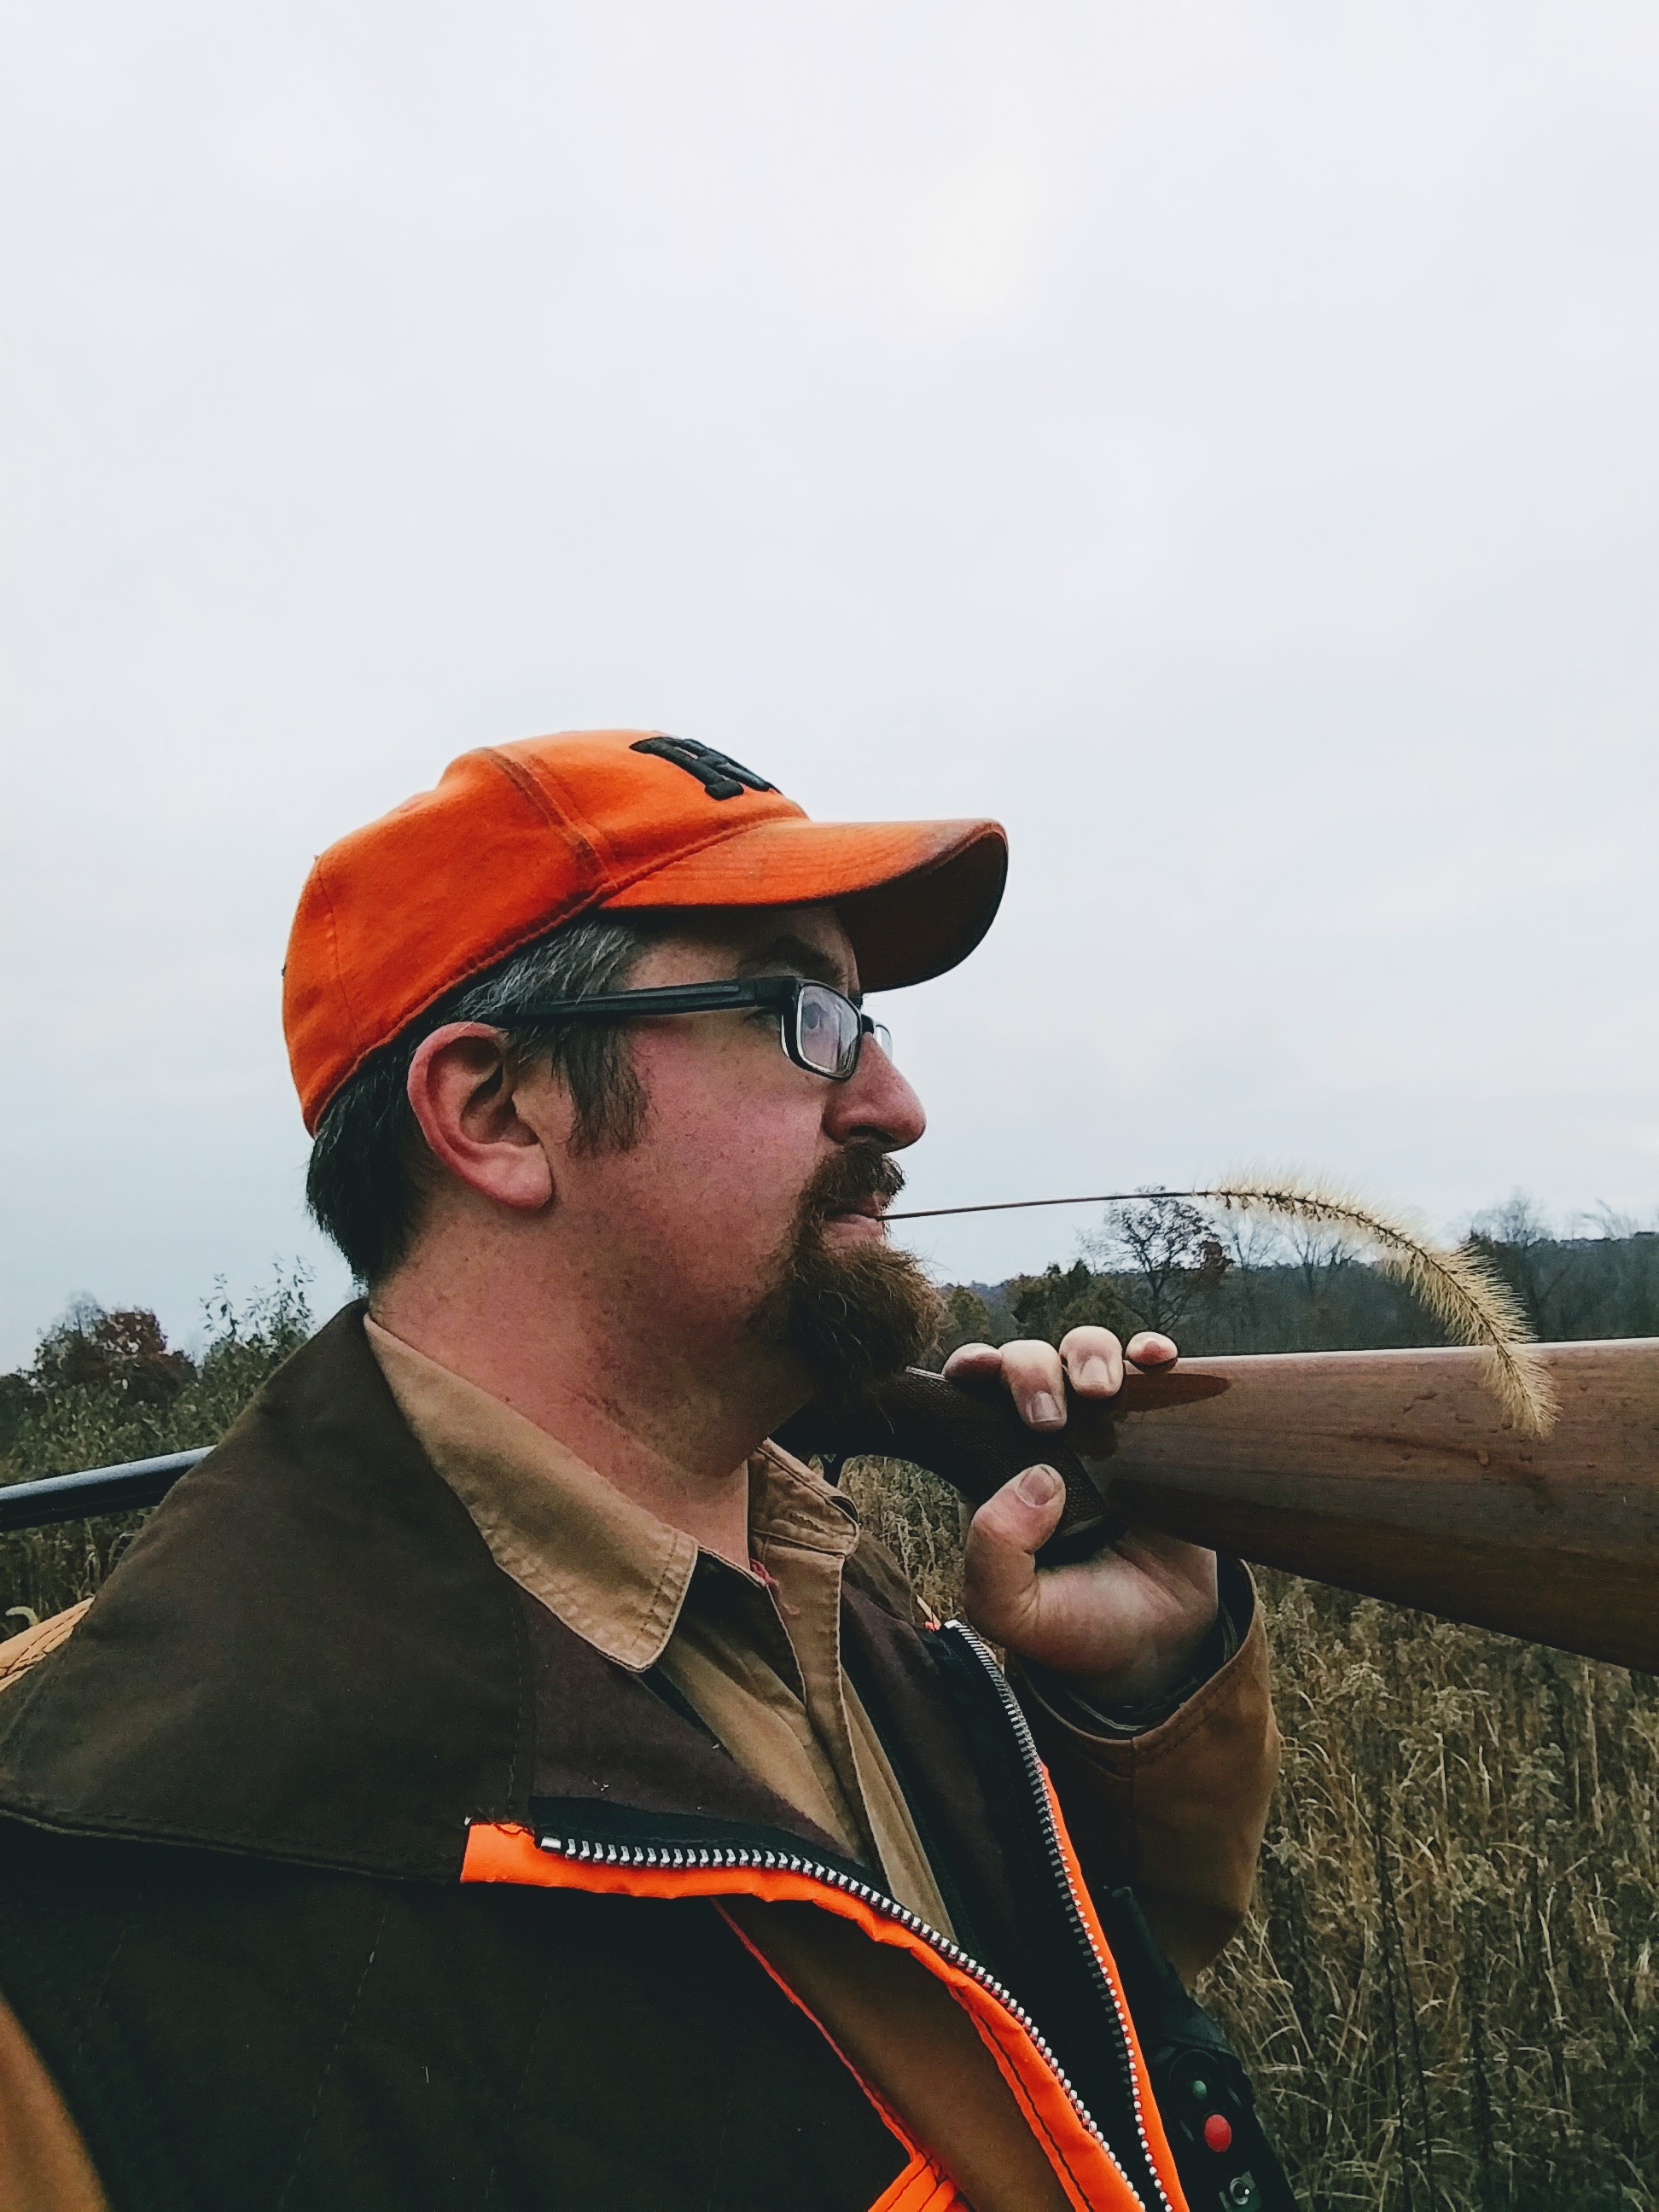 The Dan's Briarproof Upland Game Coat is one of my go-tos when heading out in the field.